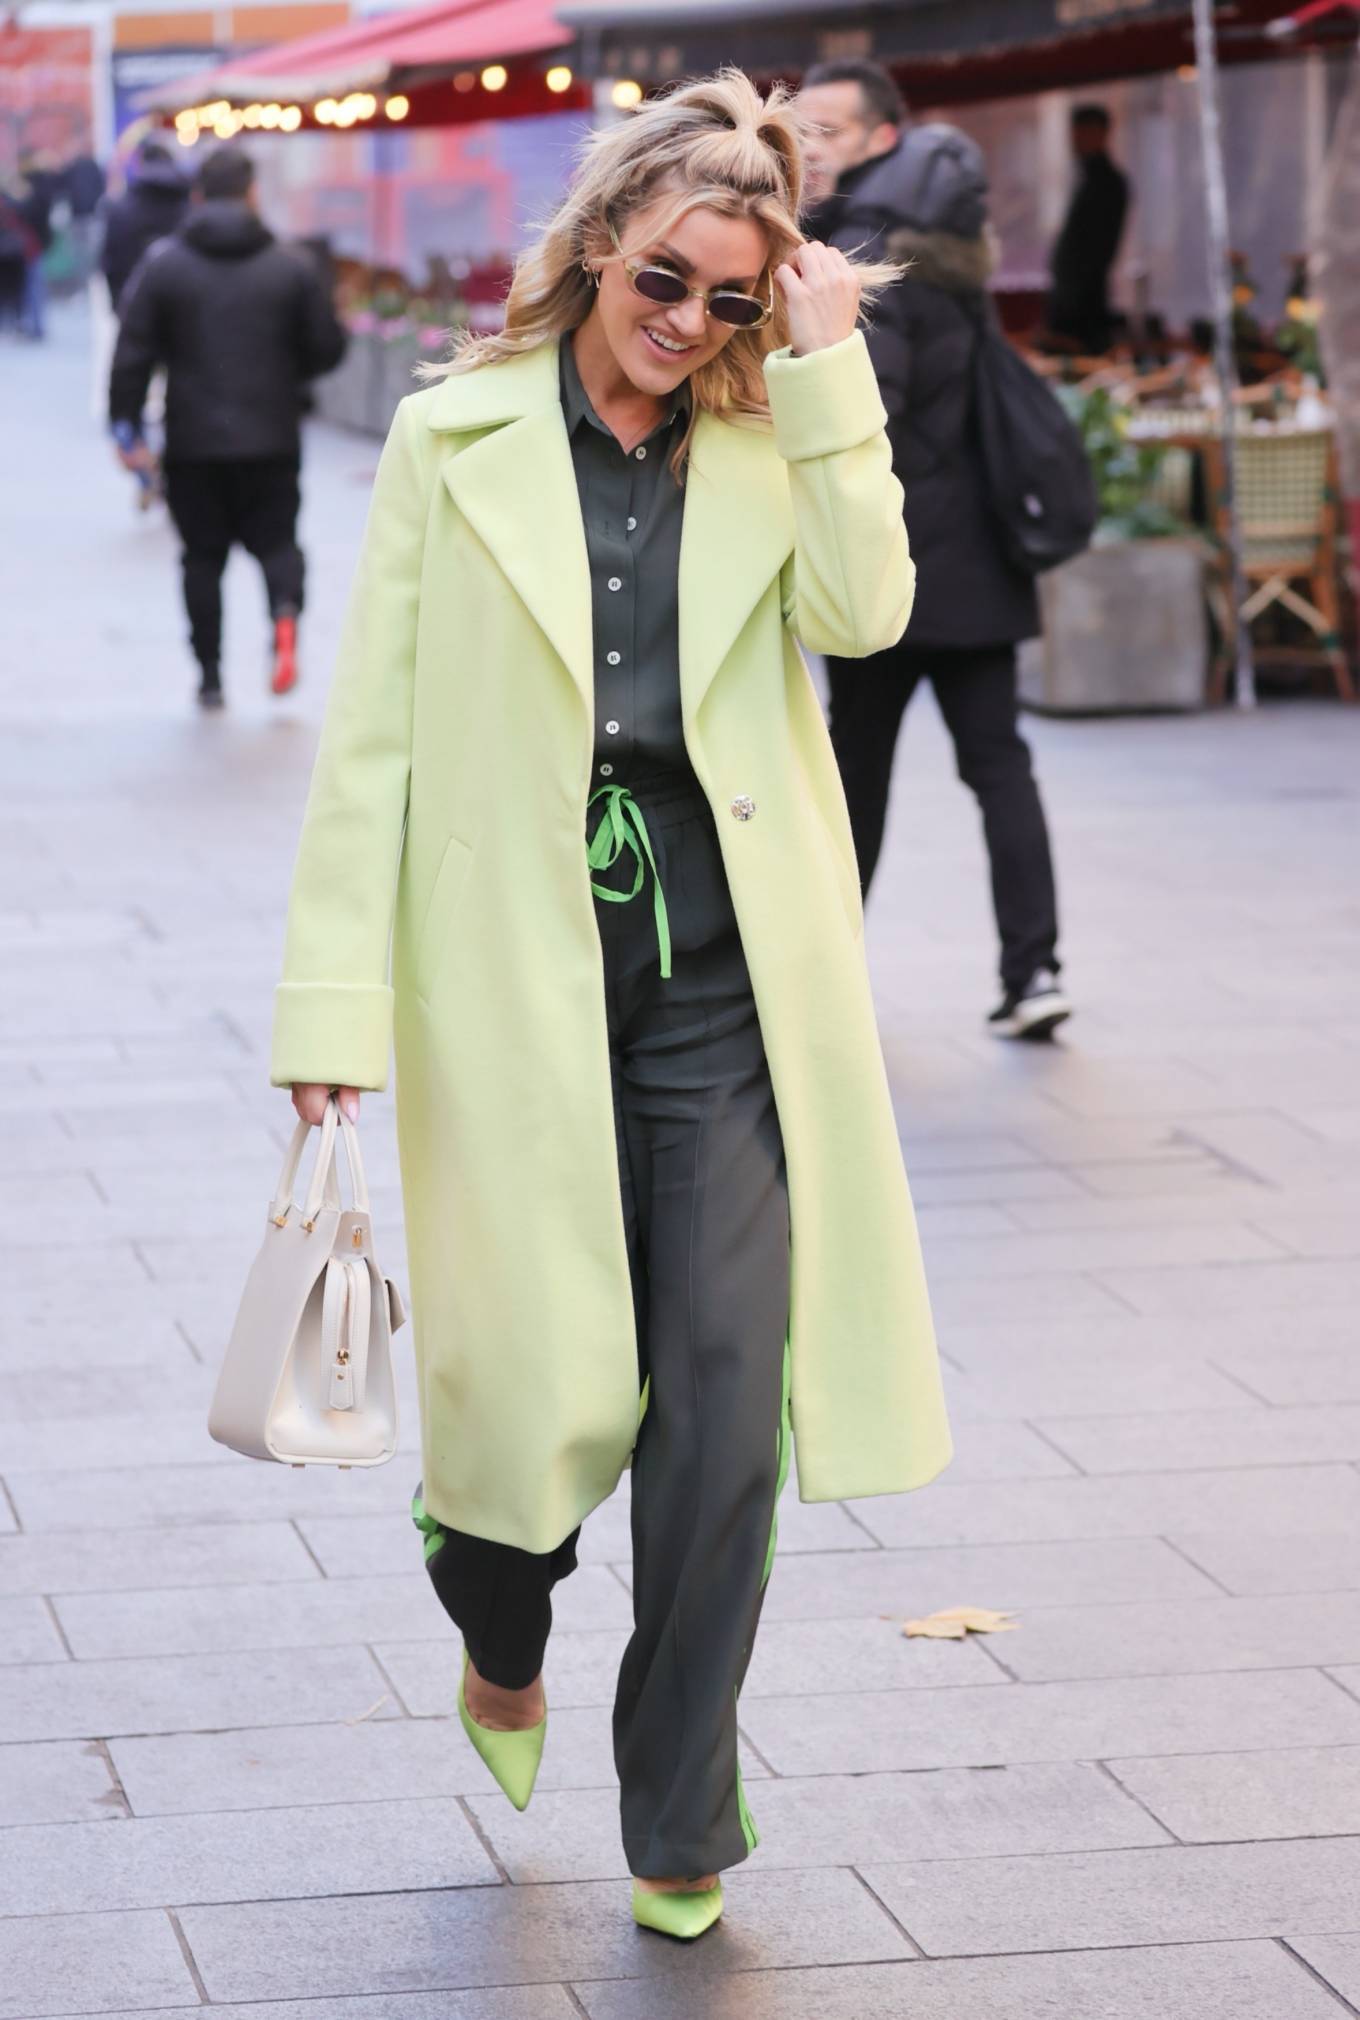 Ashley Roberts 2021 : Ashley Roberts – In a lime green trench coat at Heart radio in London-02